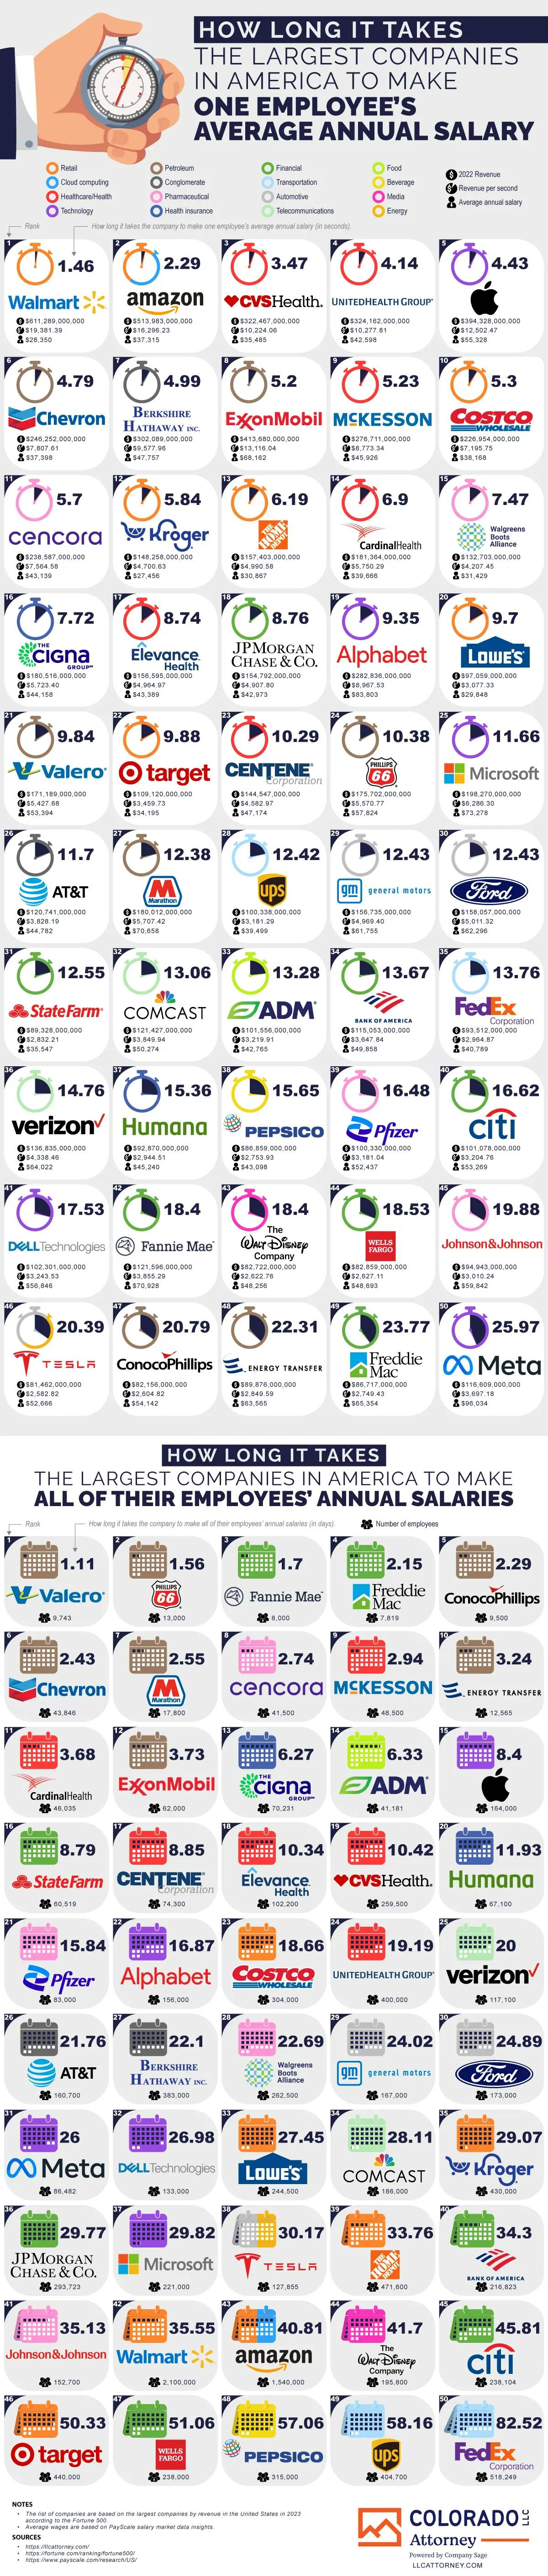 How Long It Takes the Largest Companies in America to Make One Employee’s Average Annual Salary - LLCAttorney.com - Infographic